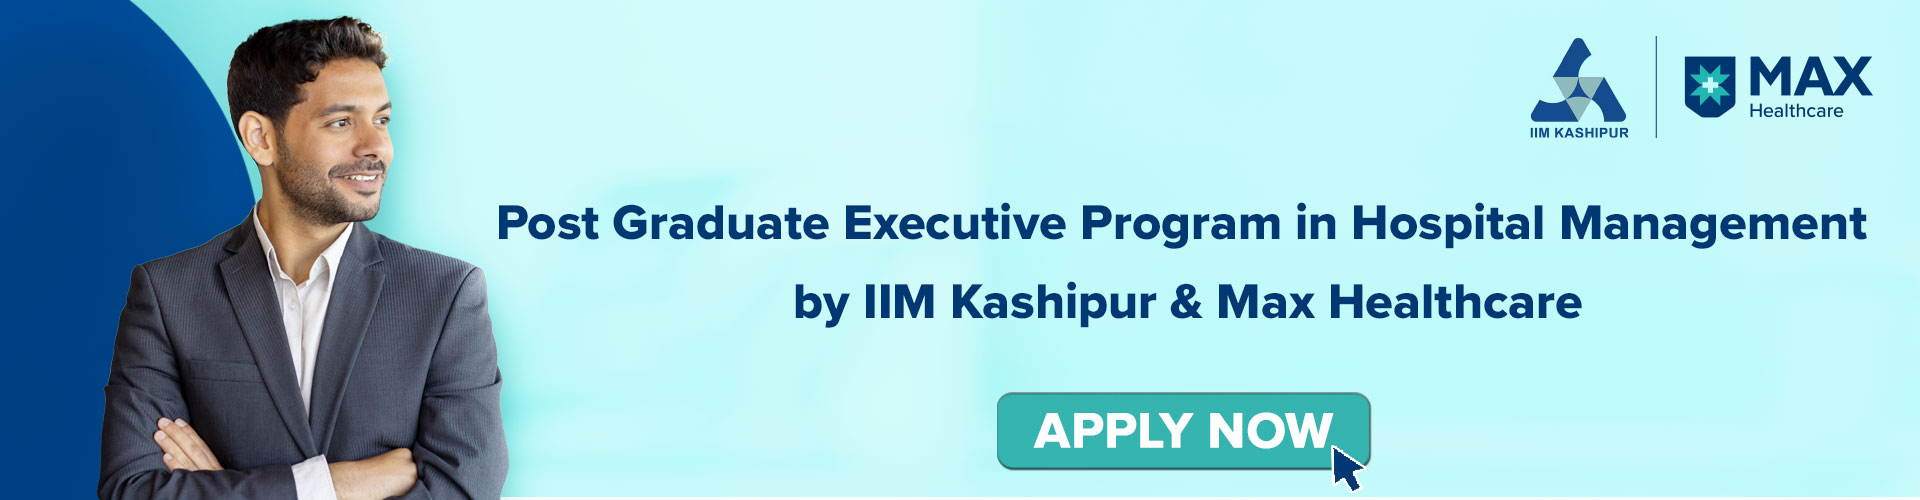 Post Graduate Executive Program in Hospital Management, in association with Max Healthcare